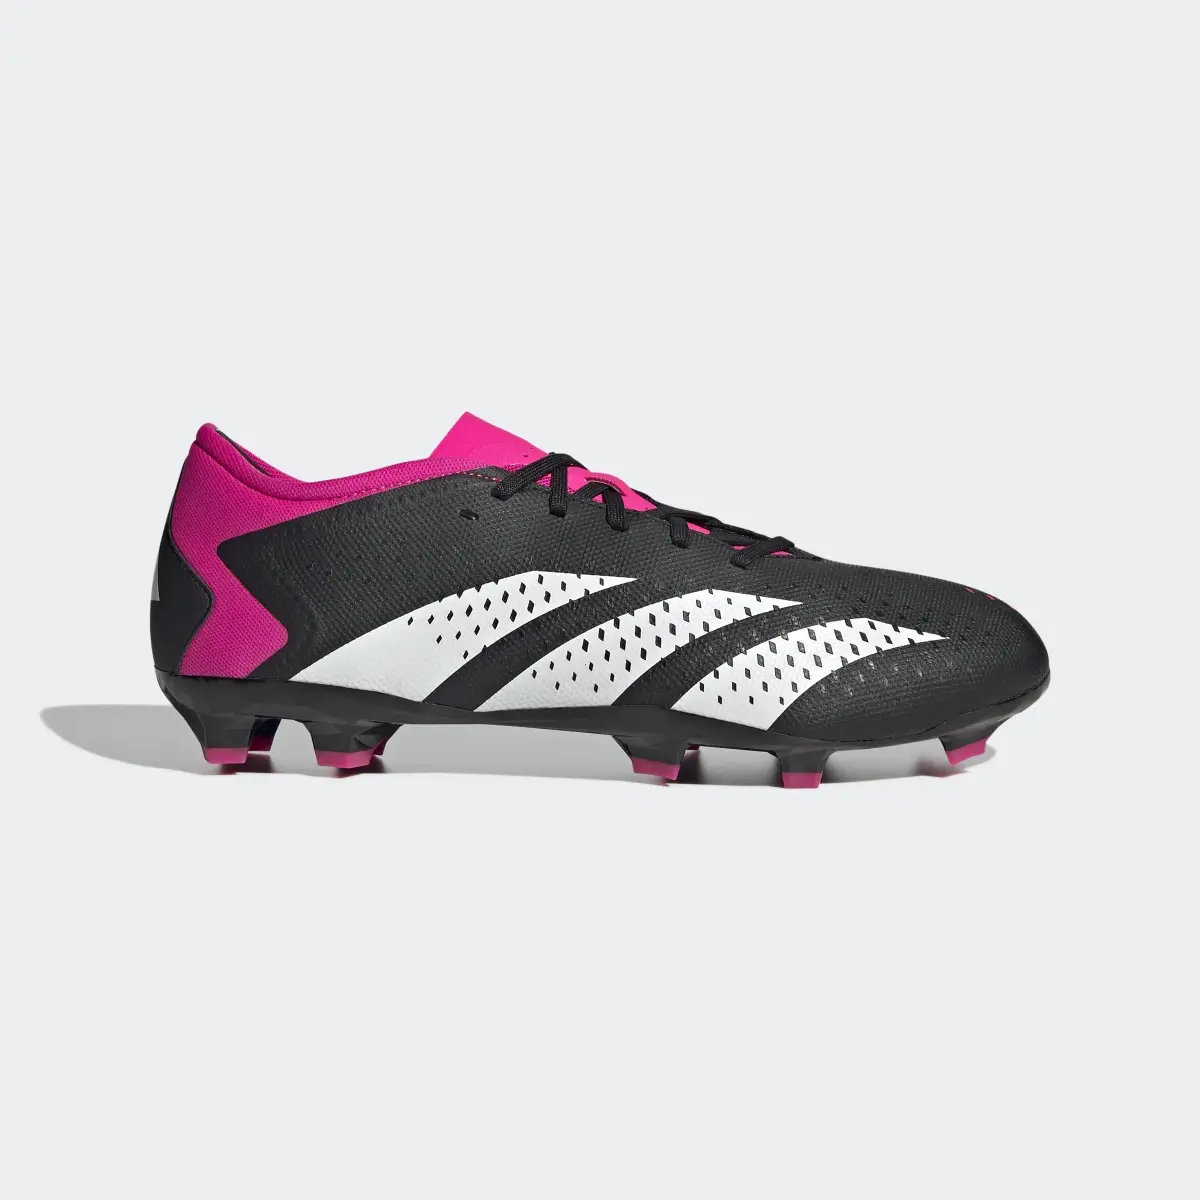 Adidas Predator Accuracy.3 Low Firm Ground Boots. 2